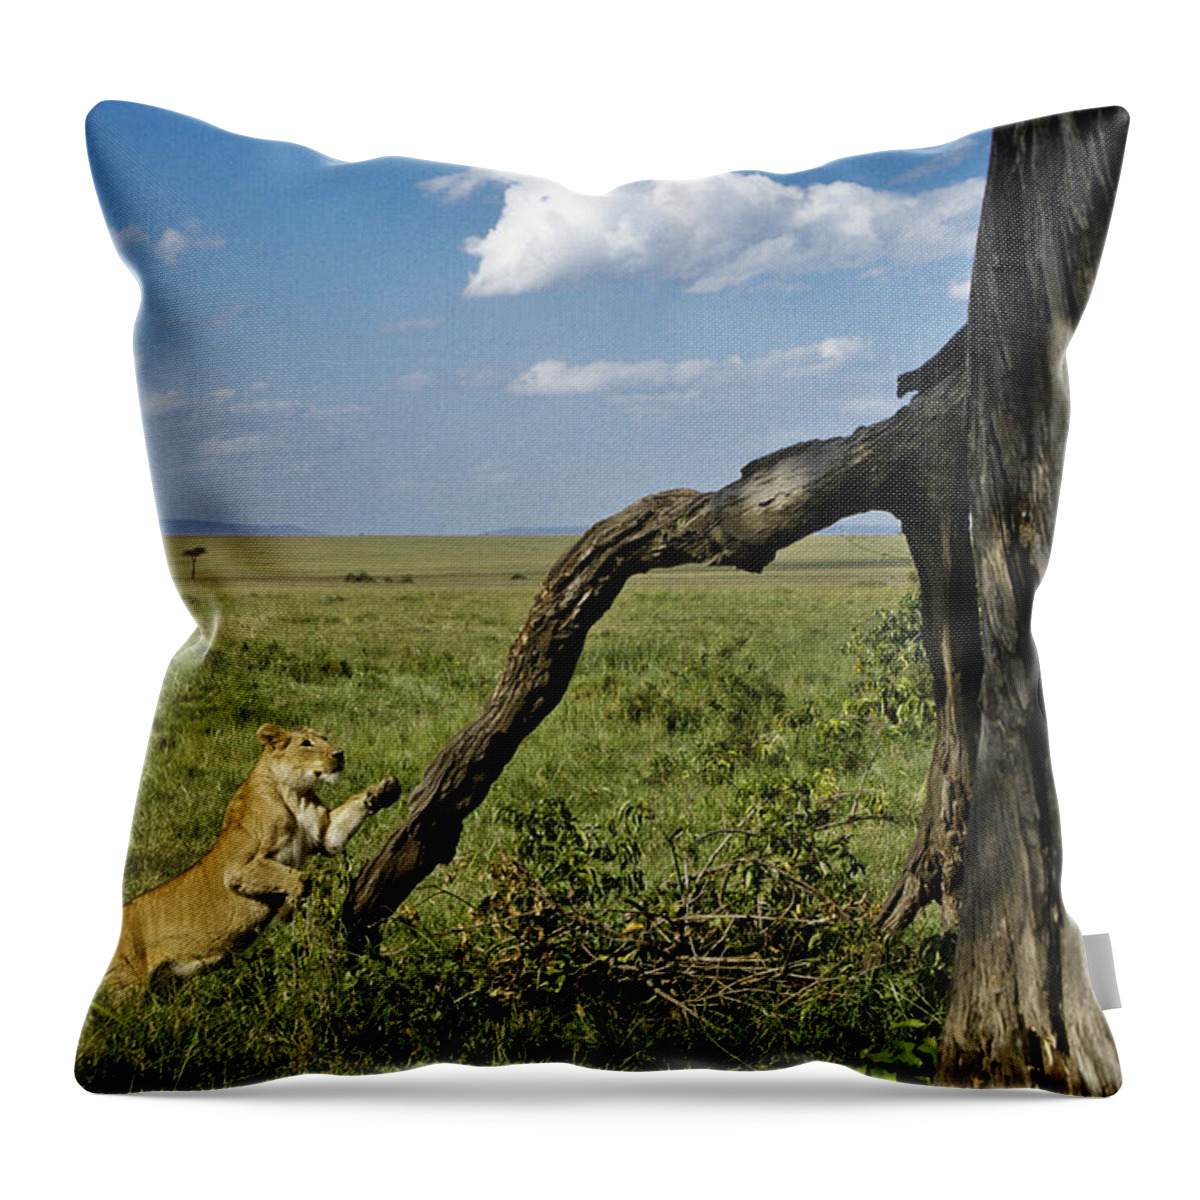 Africa Throw Pillow featuring the photograph Leaping Lion by Michele Burgess